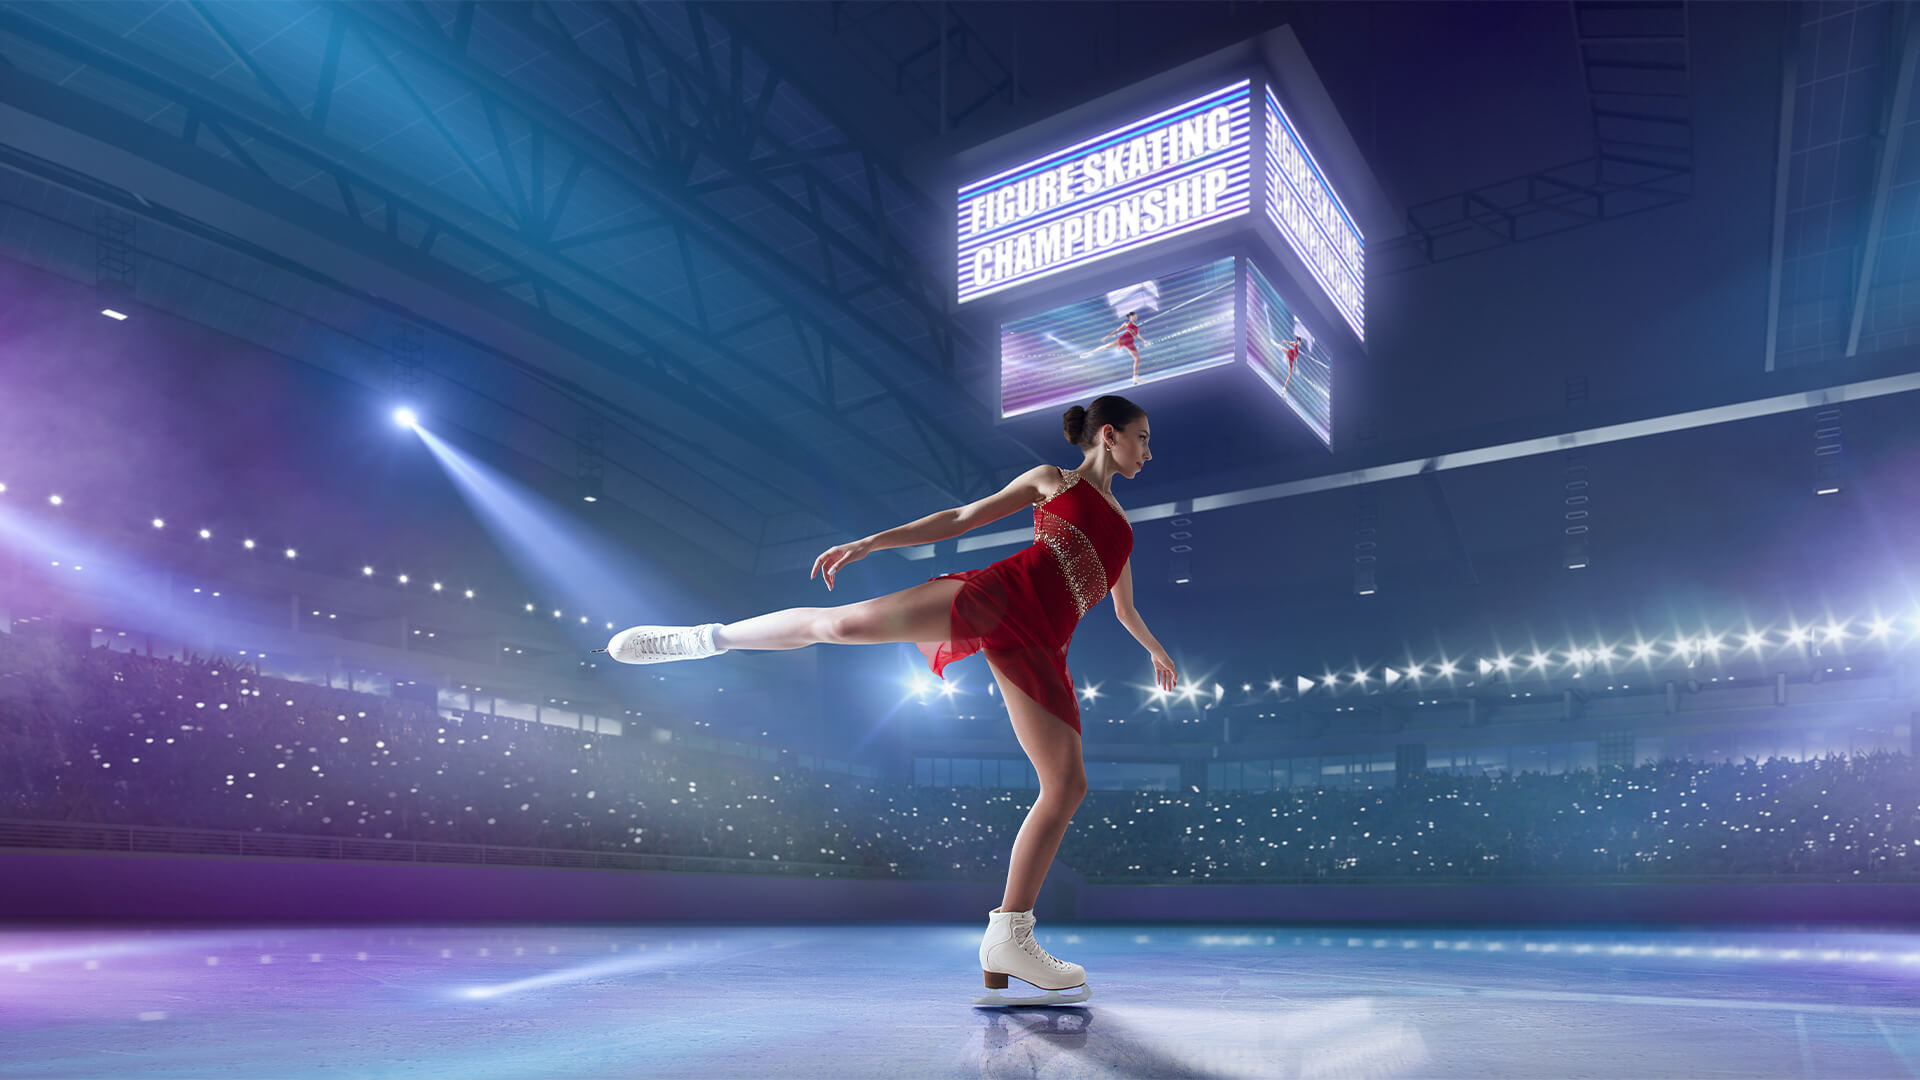 Figure skater with a red costume